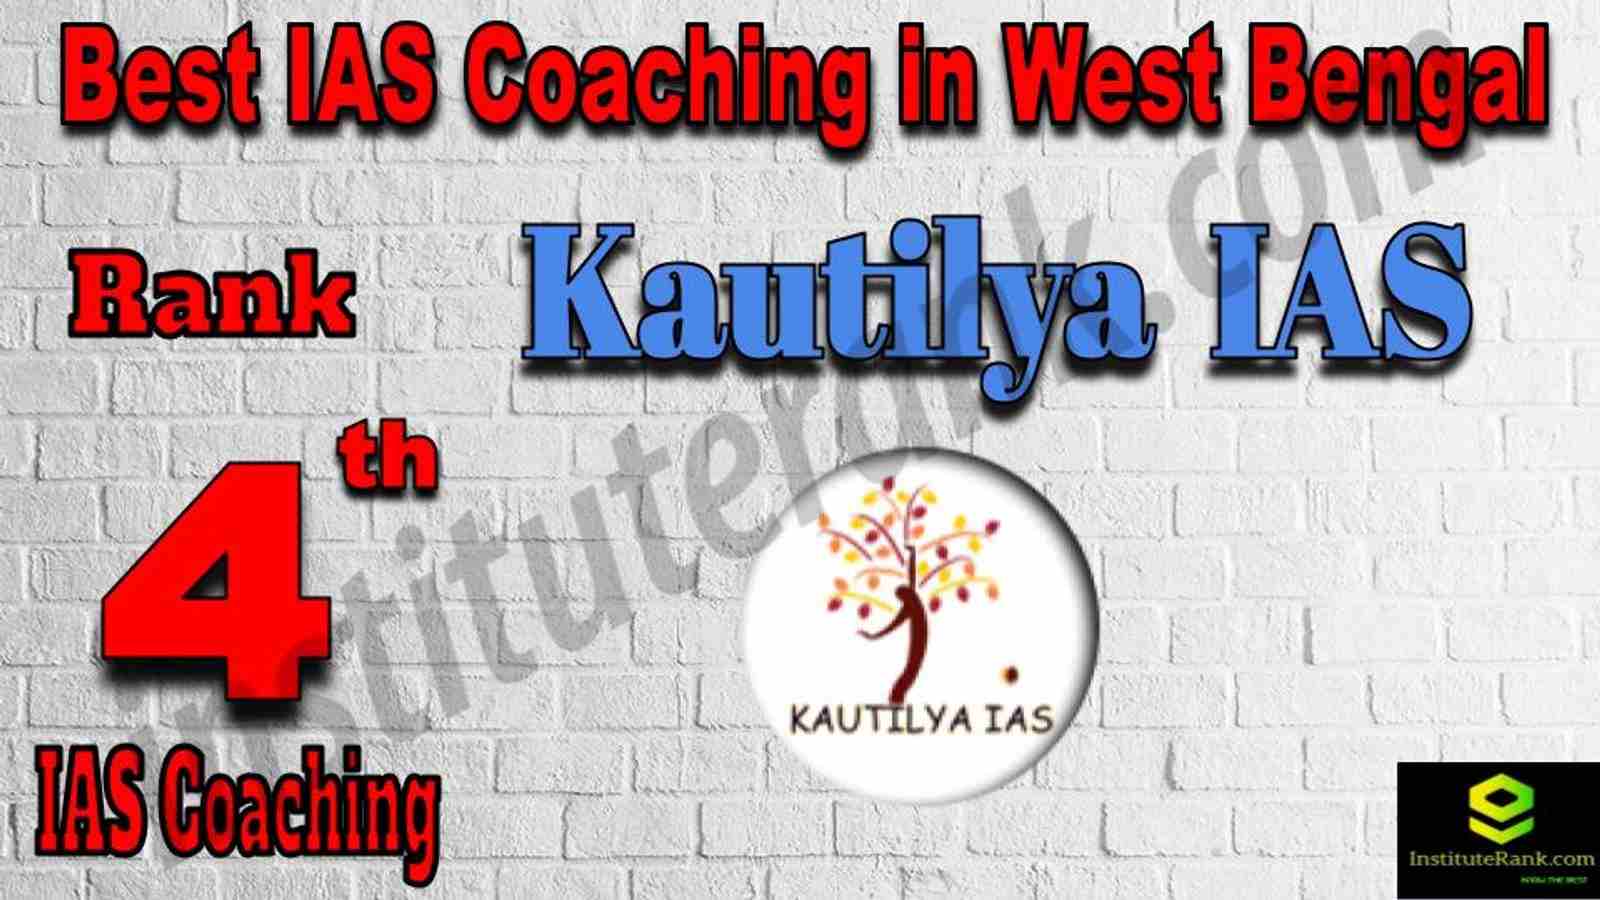 4th Best IAS Coaching in West Bengal